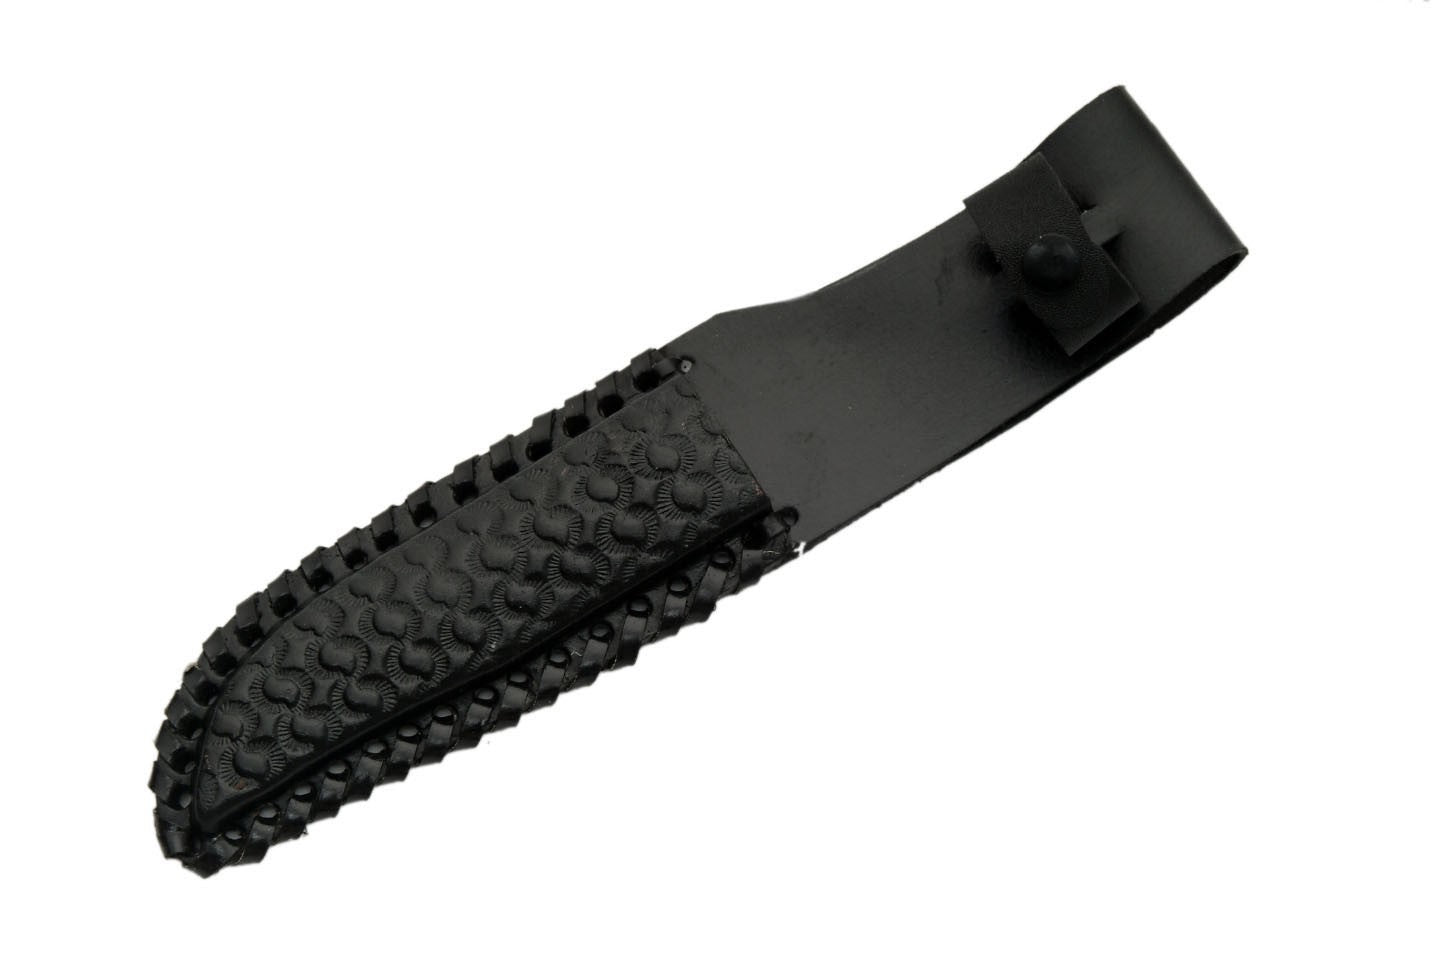 The sheath for the Tiger Skinner Knife.